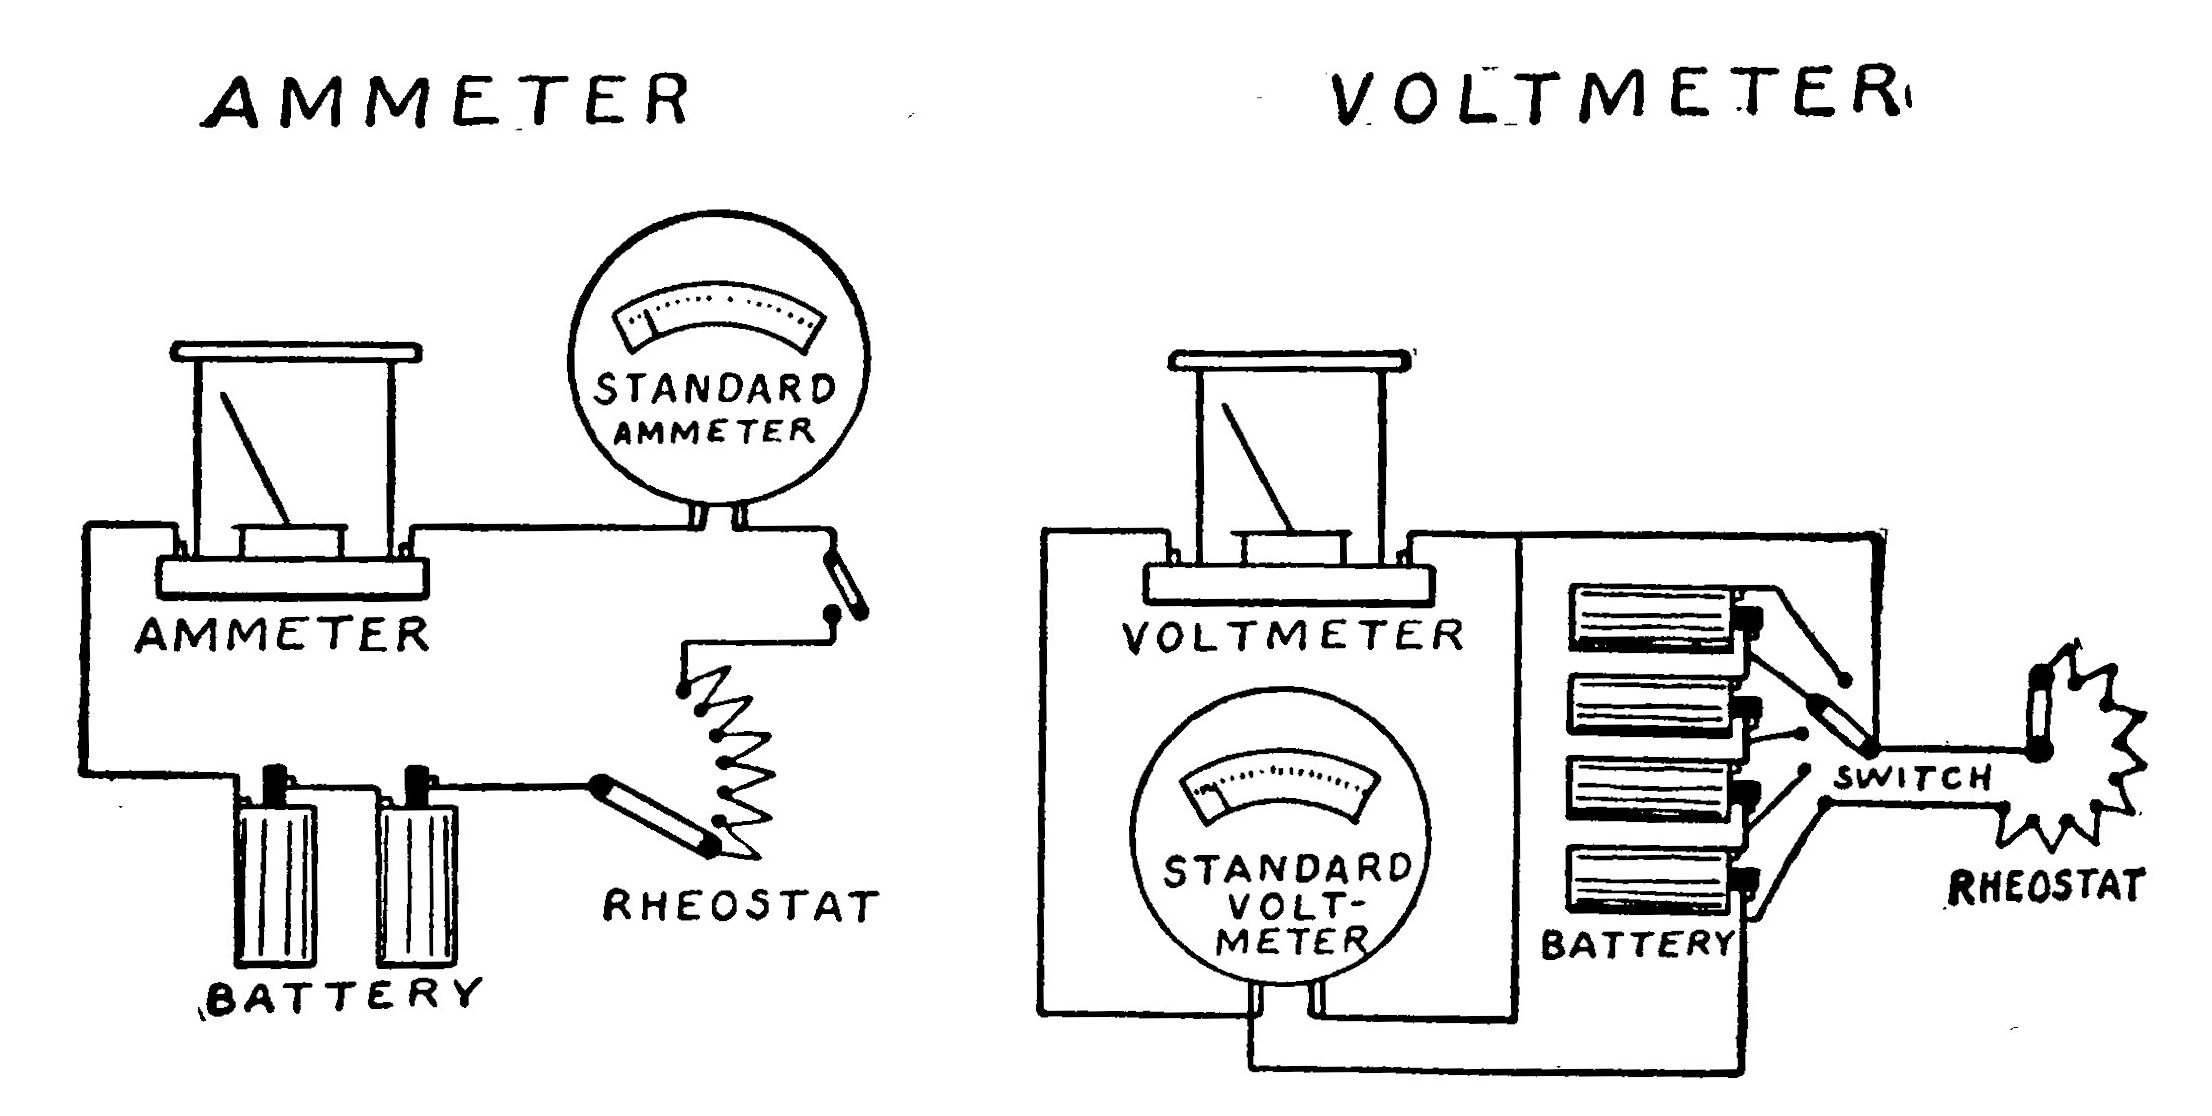 Fig. 109.—Circuits for Calibrating the Ammeter and Voltmeter.